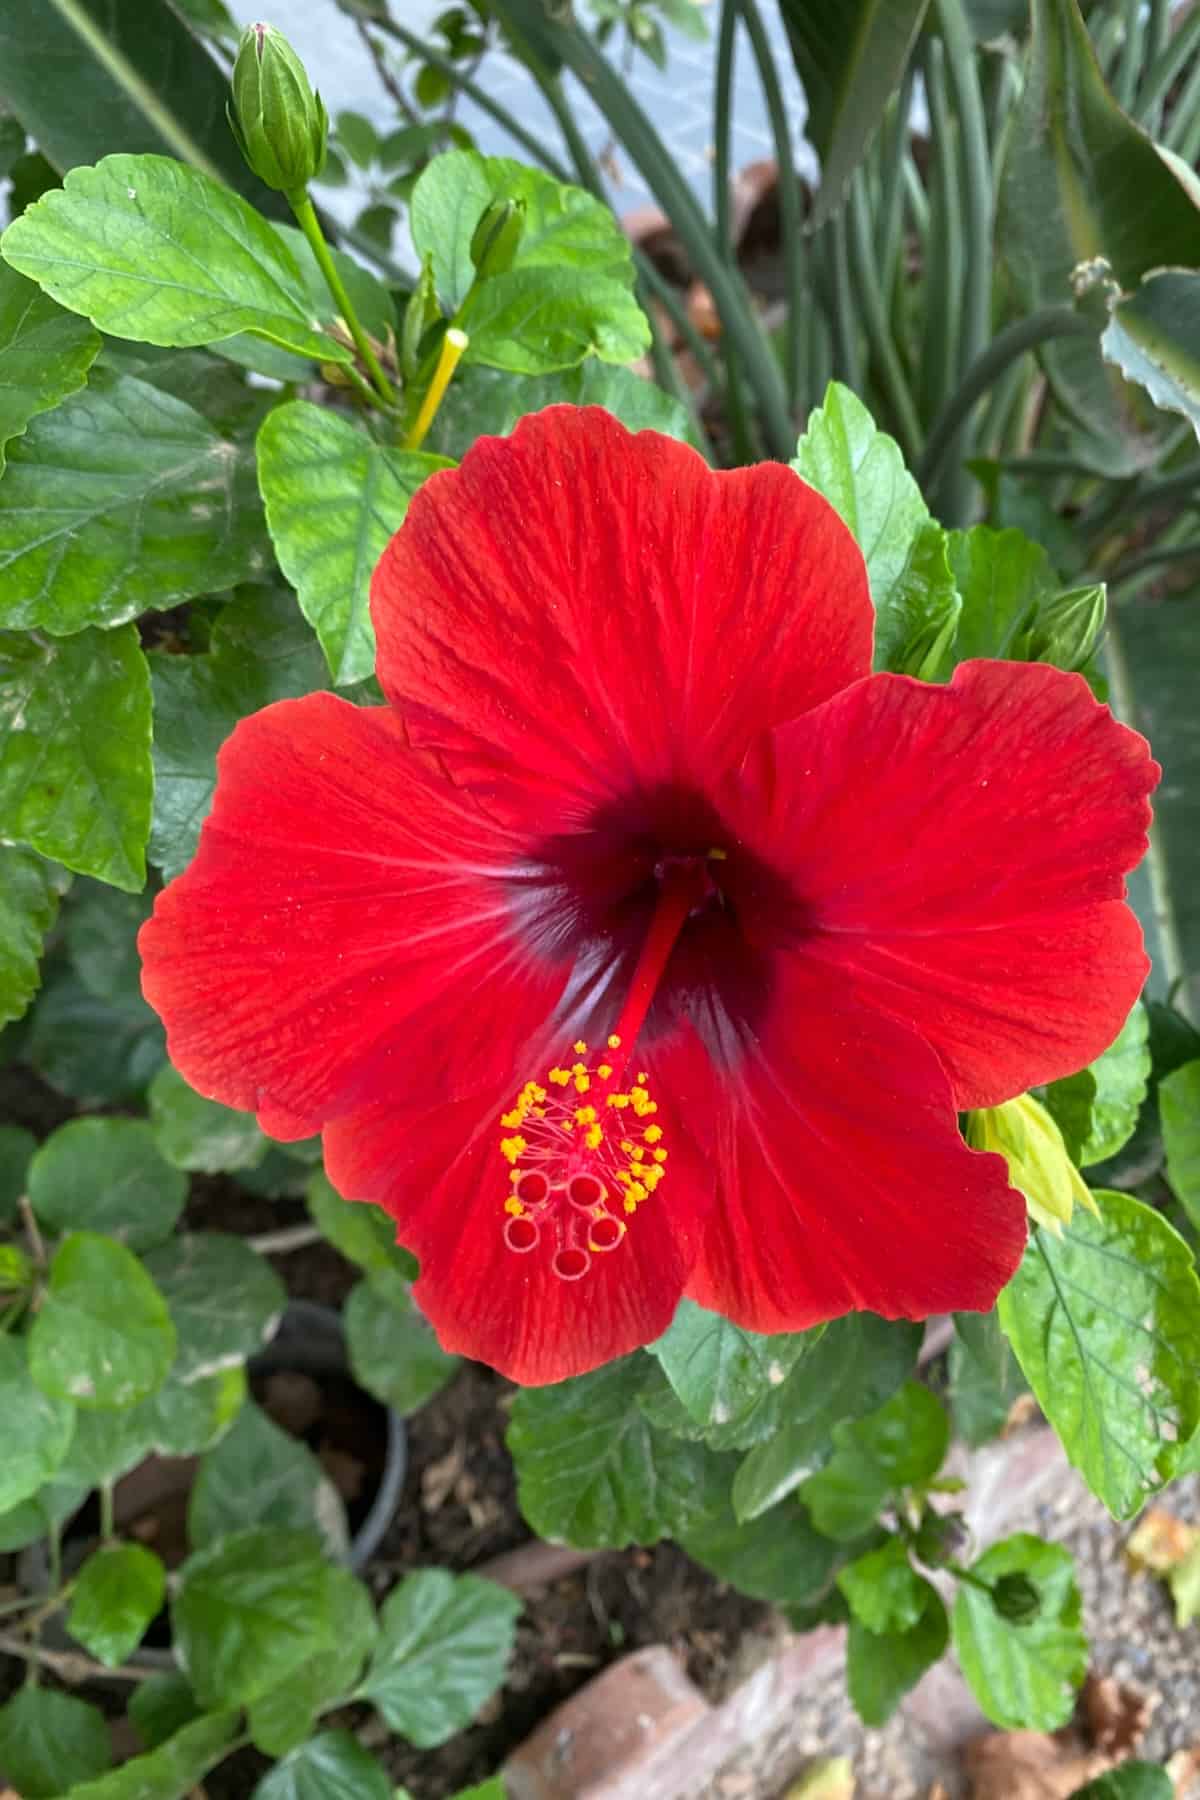 Red hibiscus flower on the plant